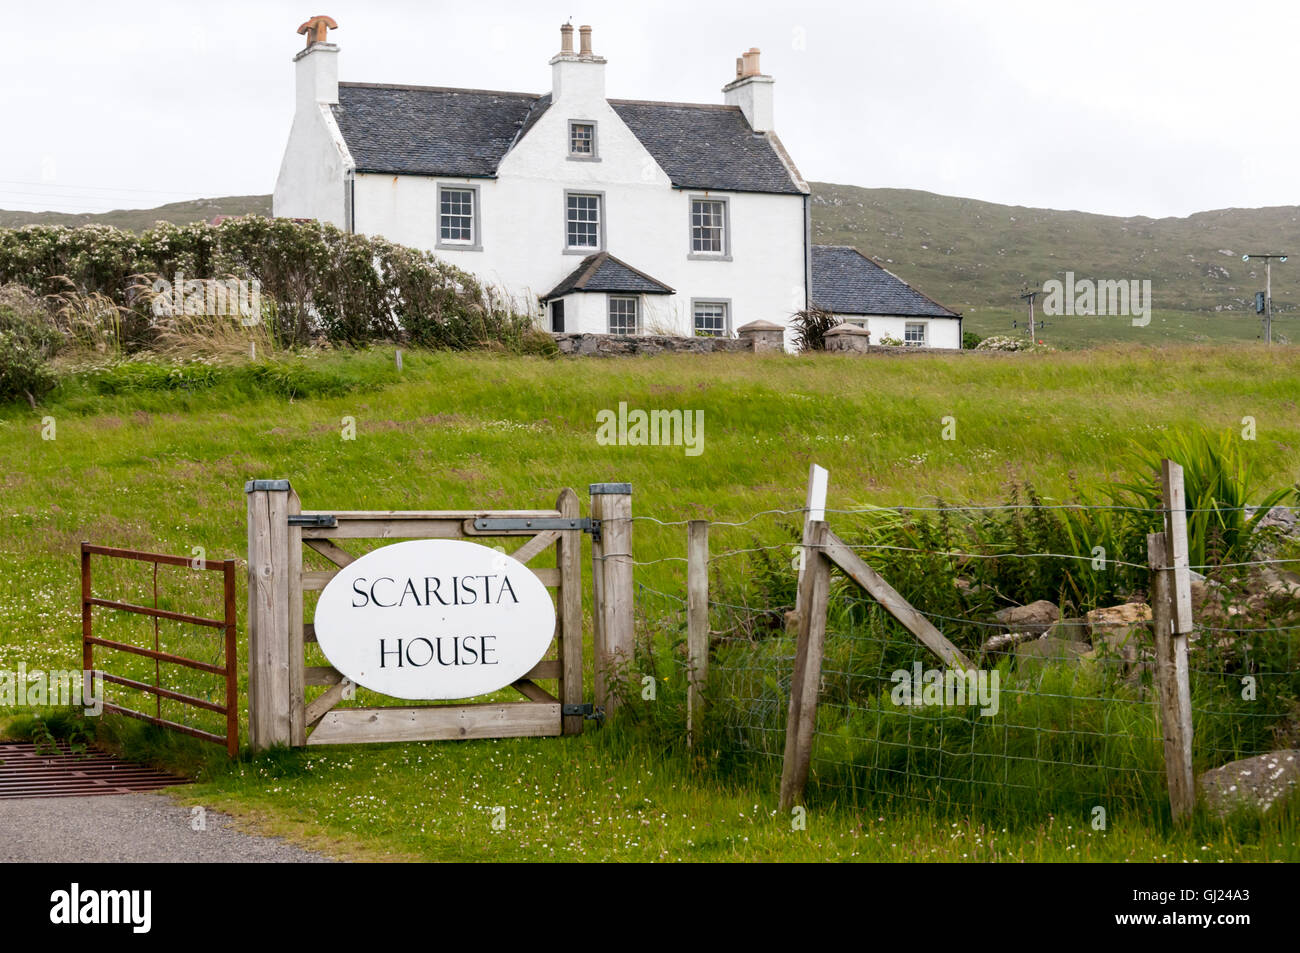 Scarista House hotel and restaurant on the Isle of Harris, Outer Hebrides. Stock Photo